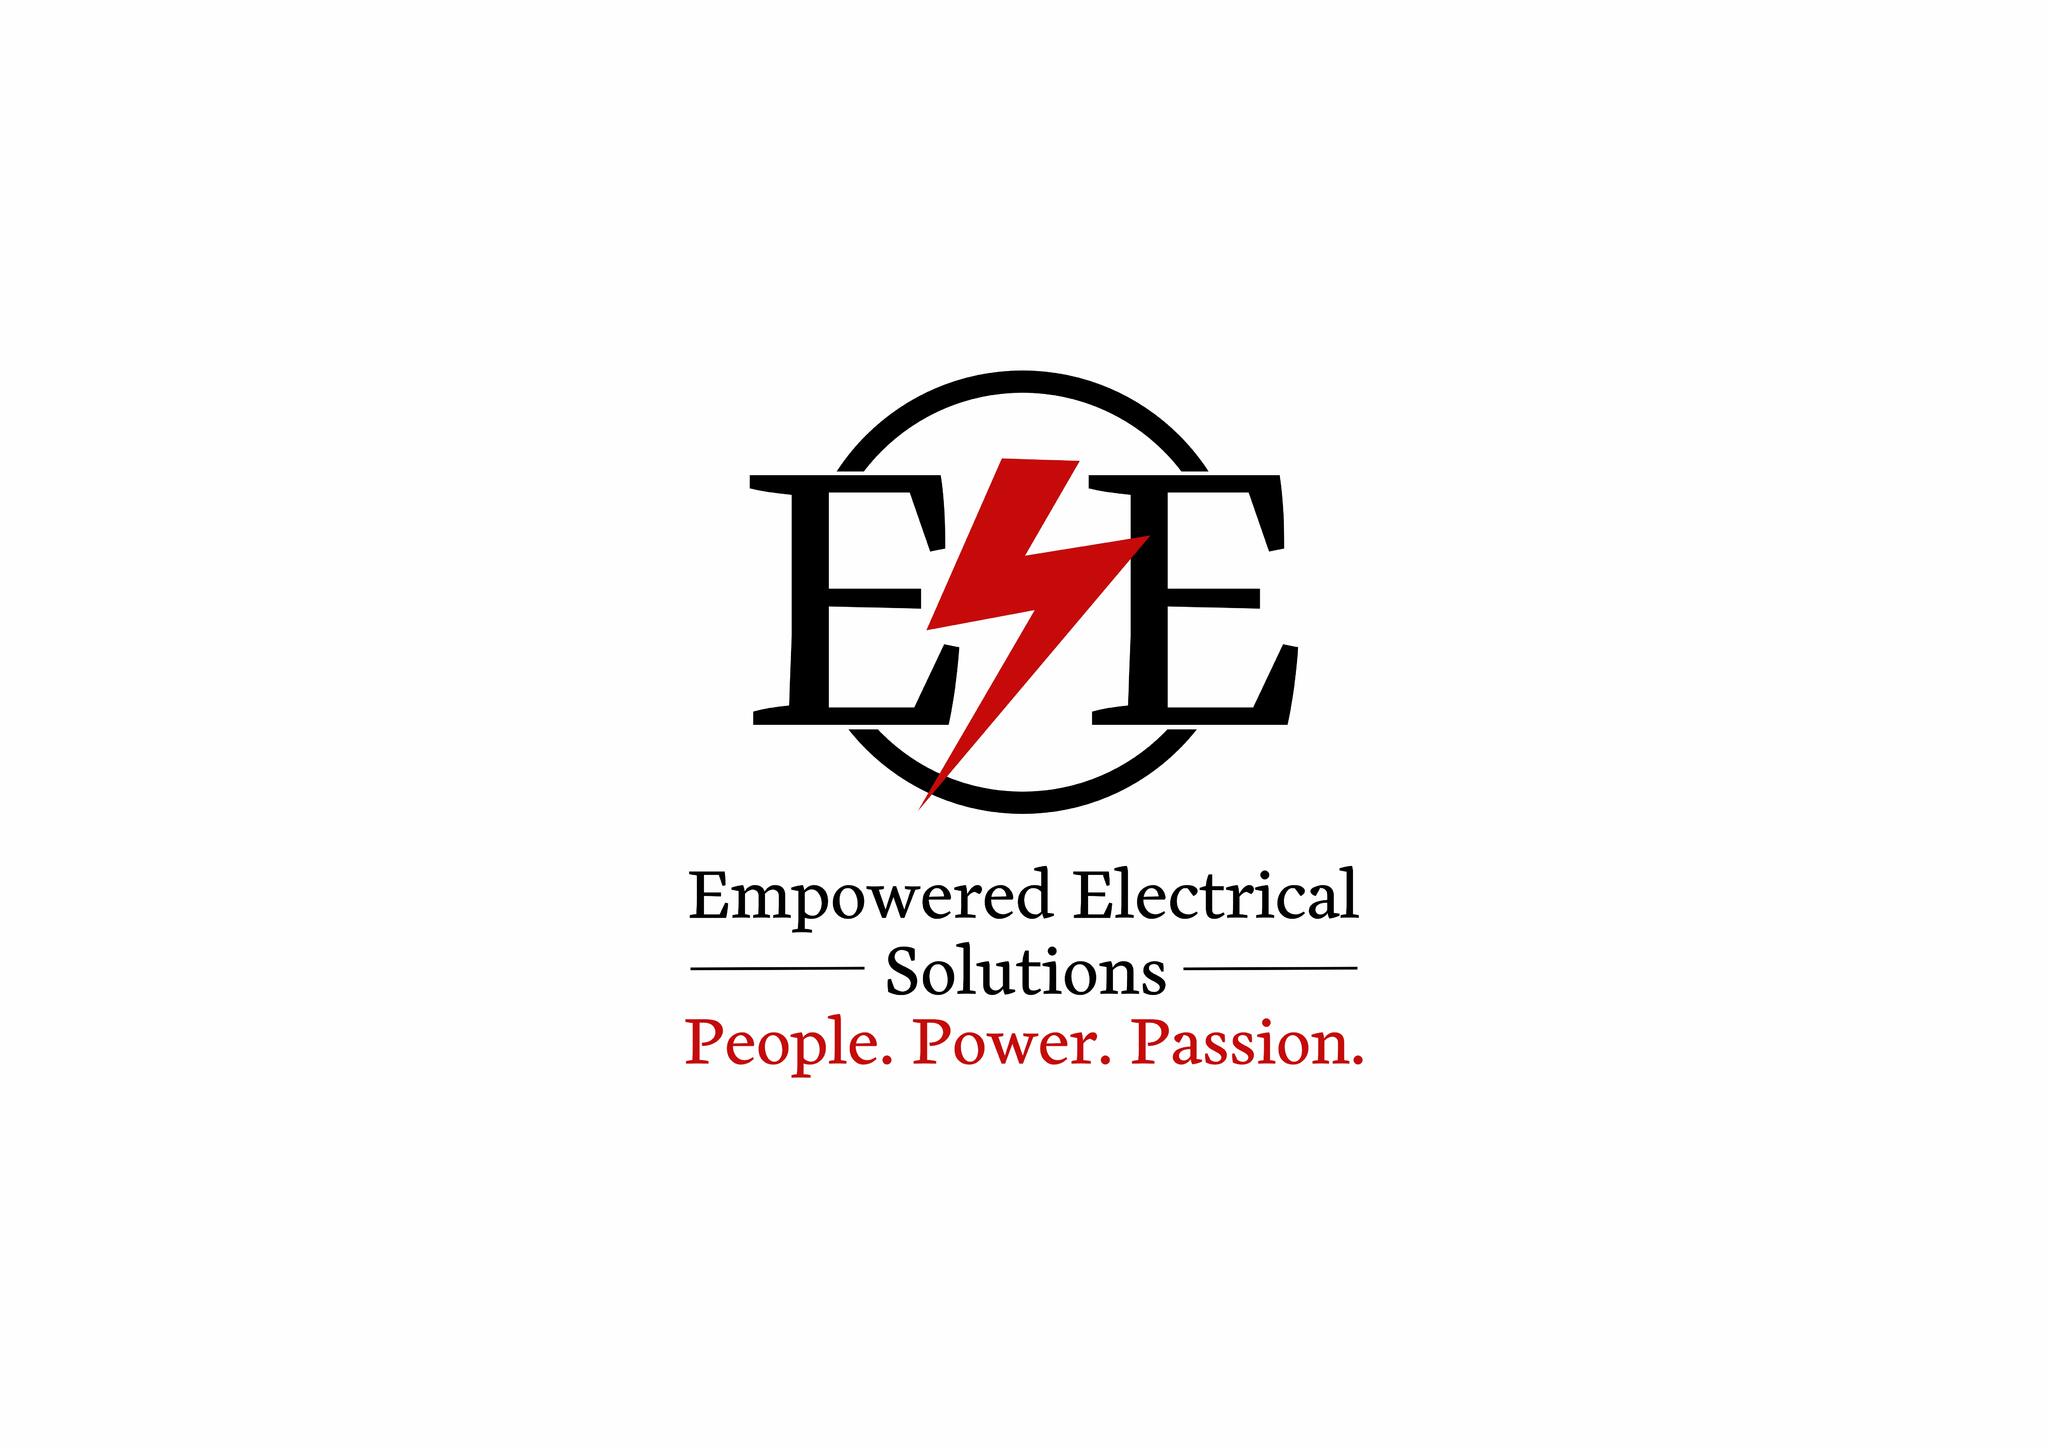 Empower Electric – Empowering Electricians